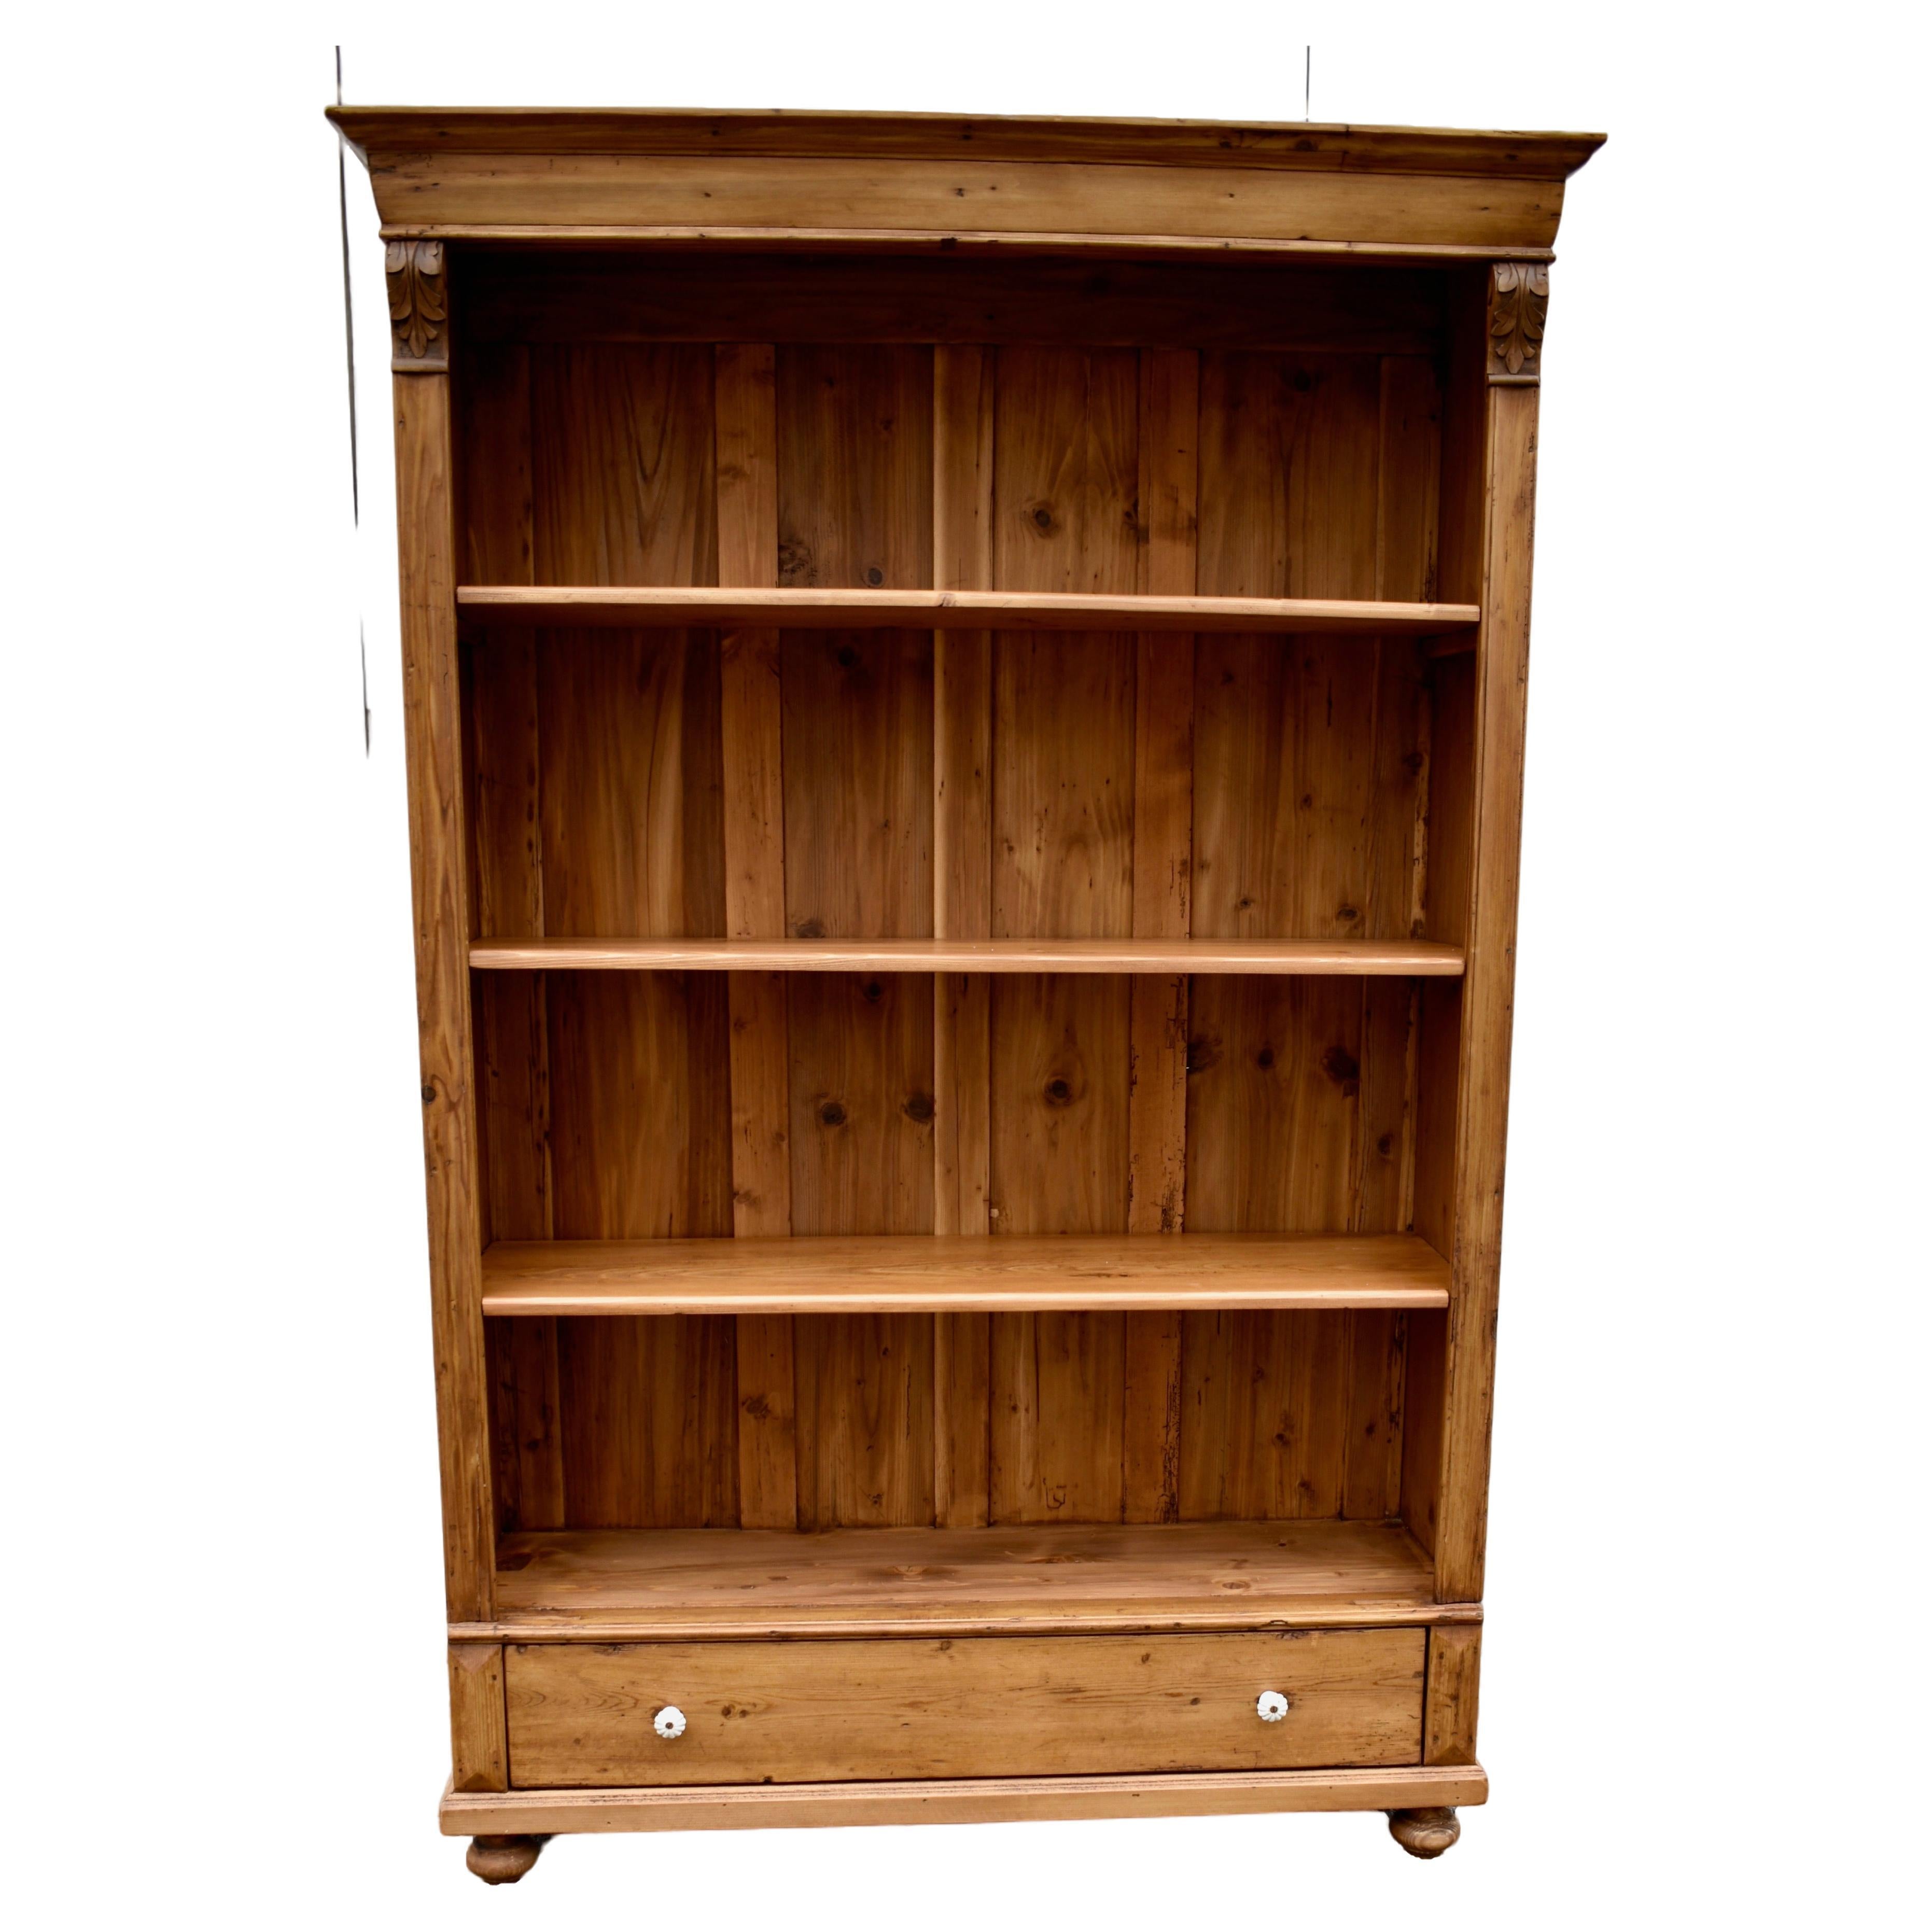 Vintage Pine Open Bookcase from Armoire